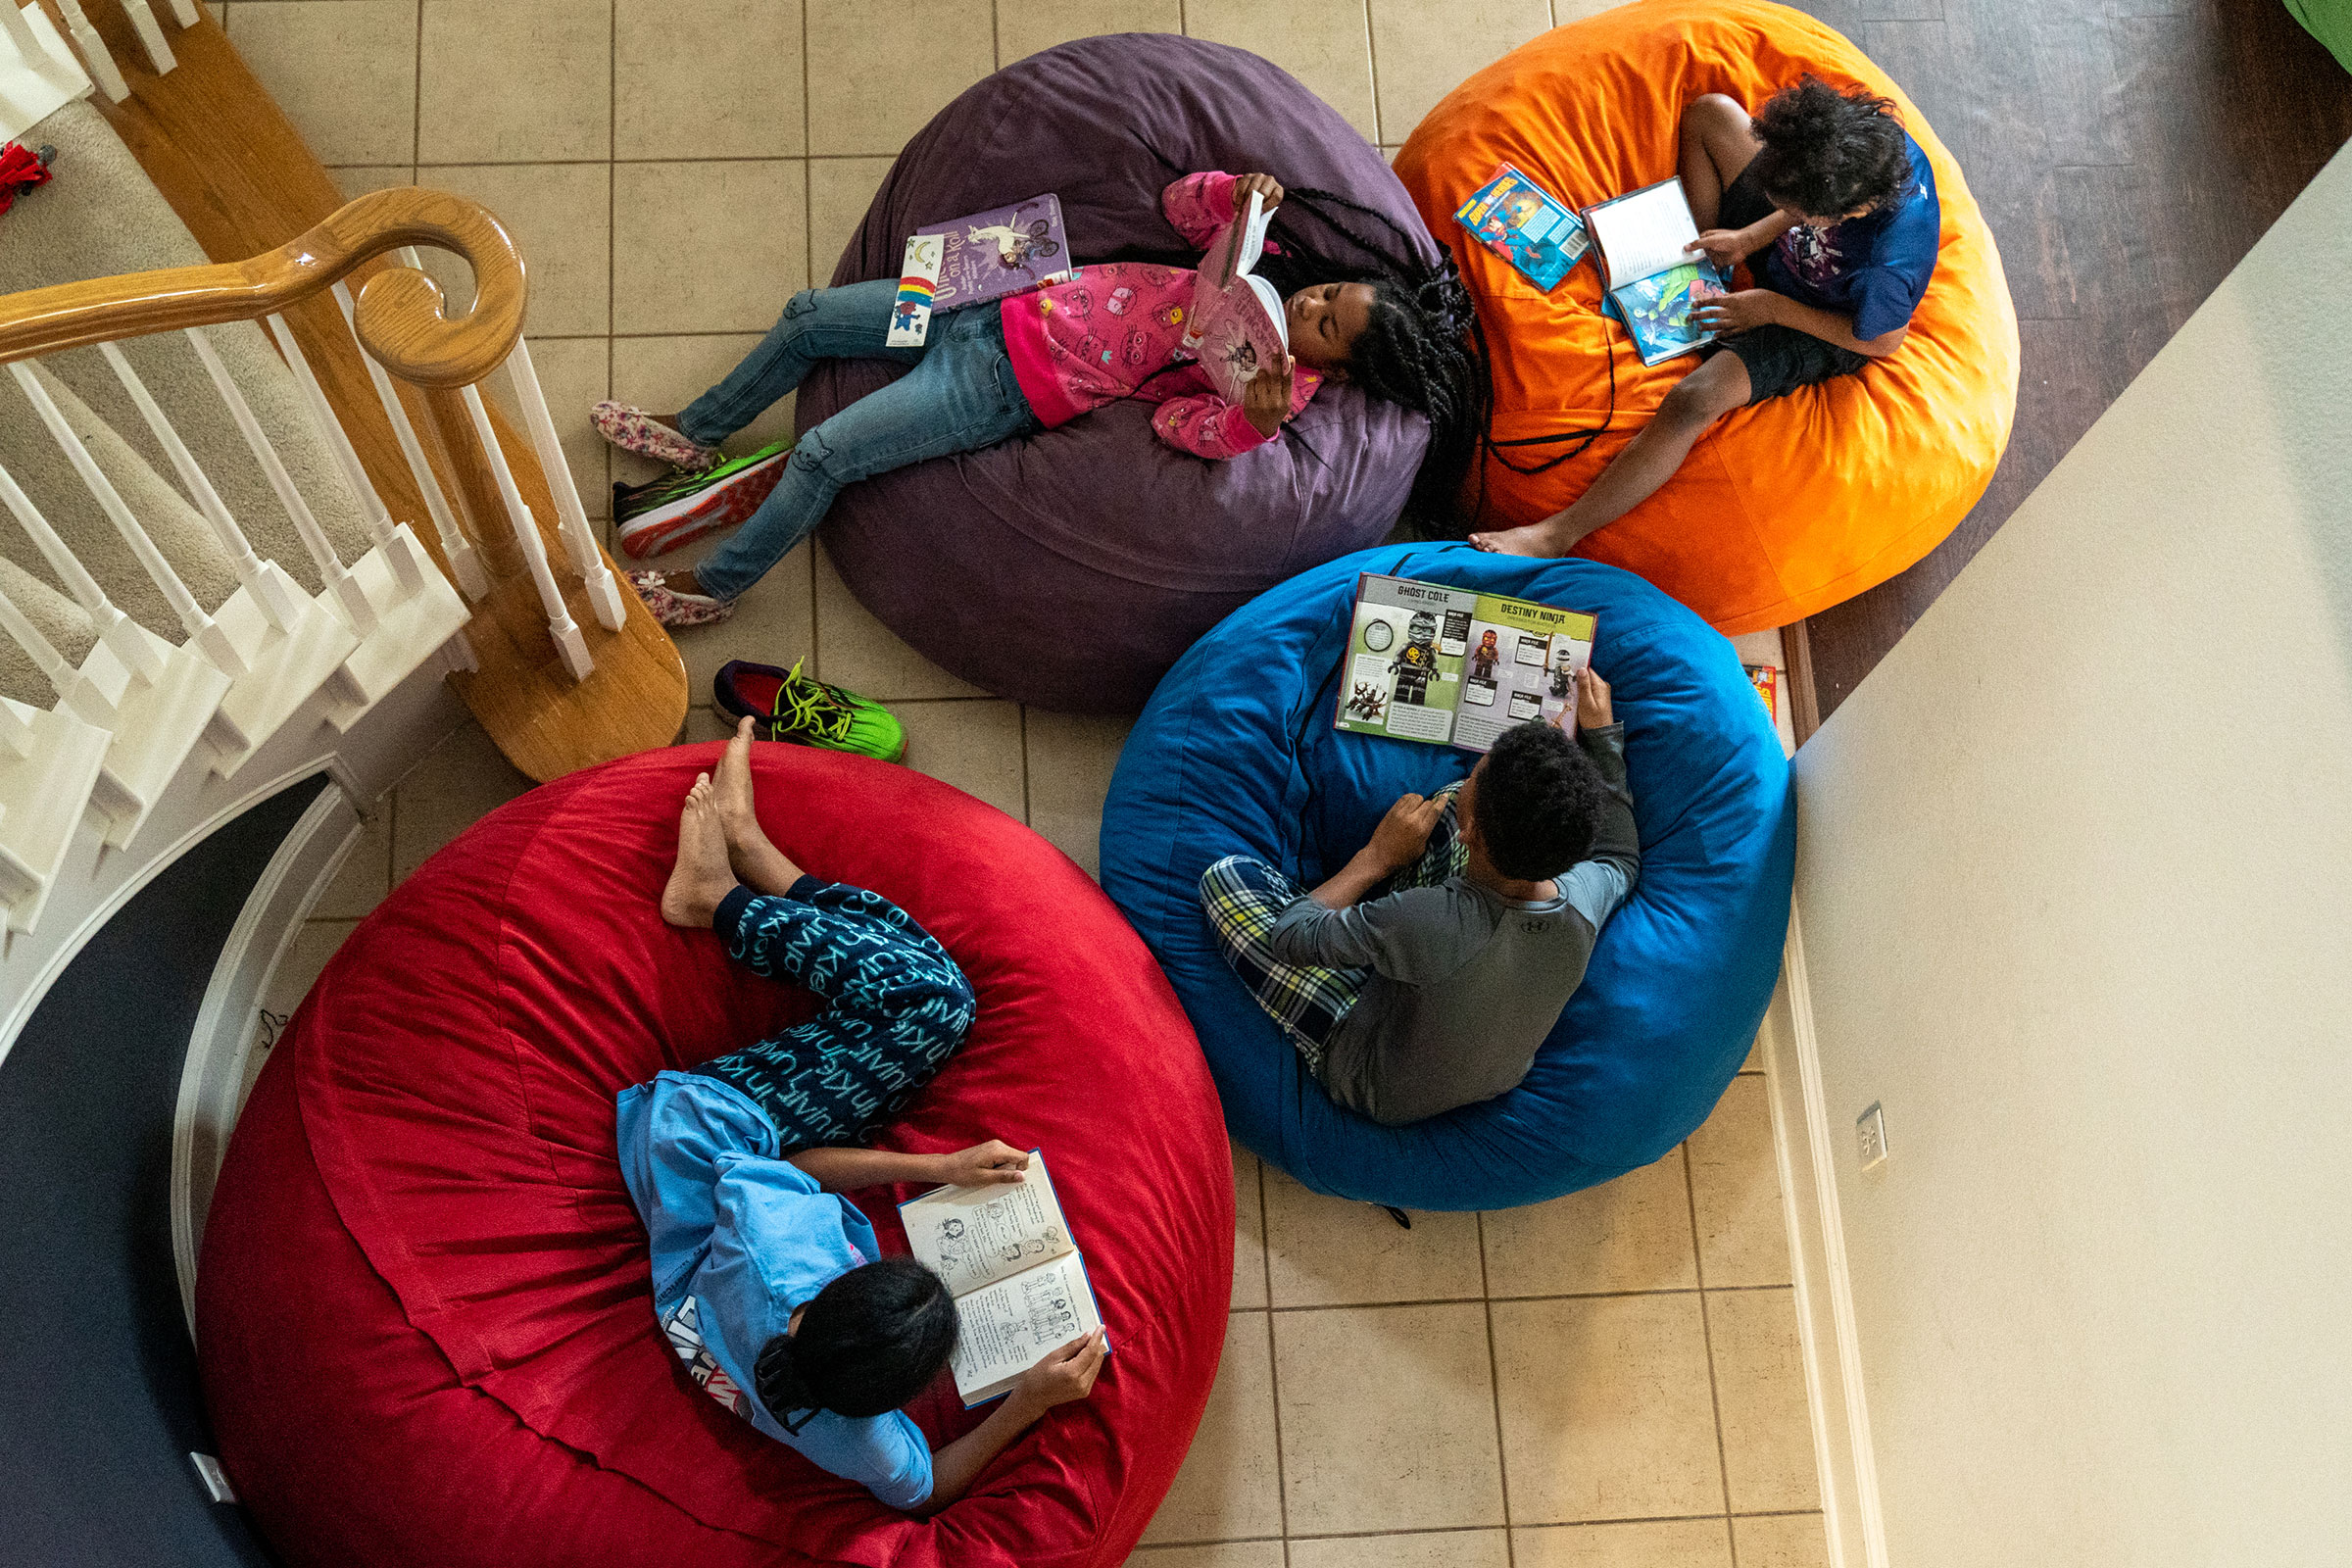 Four of the Thomas siblings read in beanbag chairs in the entryway of the family's home. (Ilana Panich-Linsman for TIME)